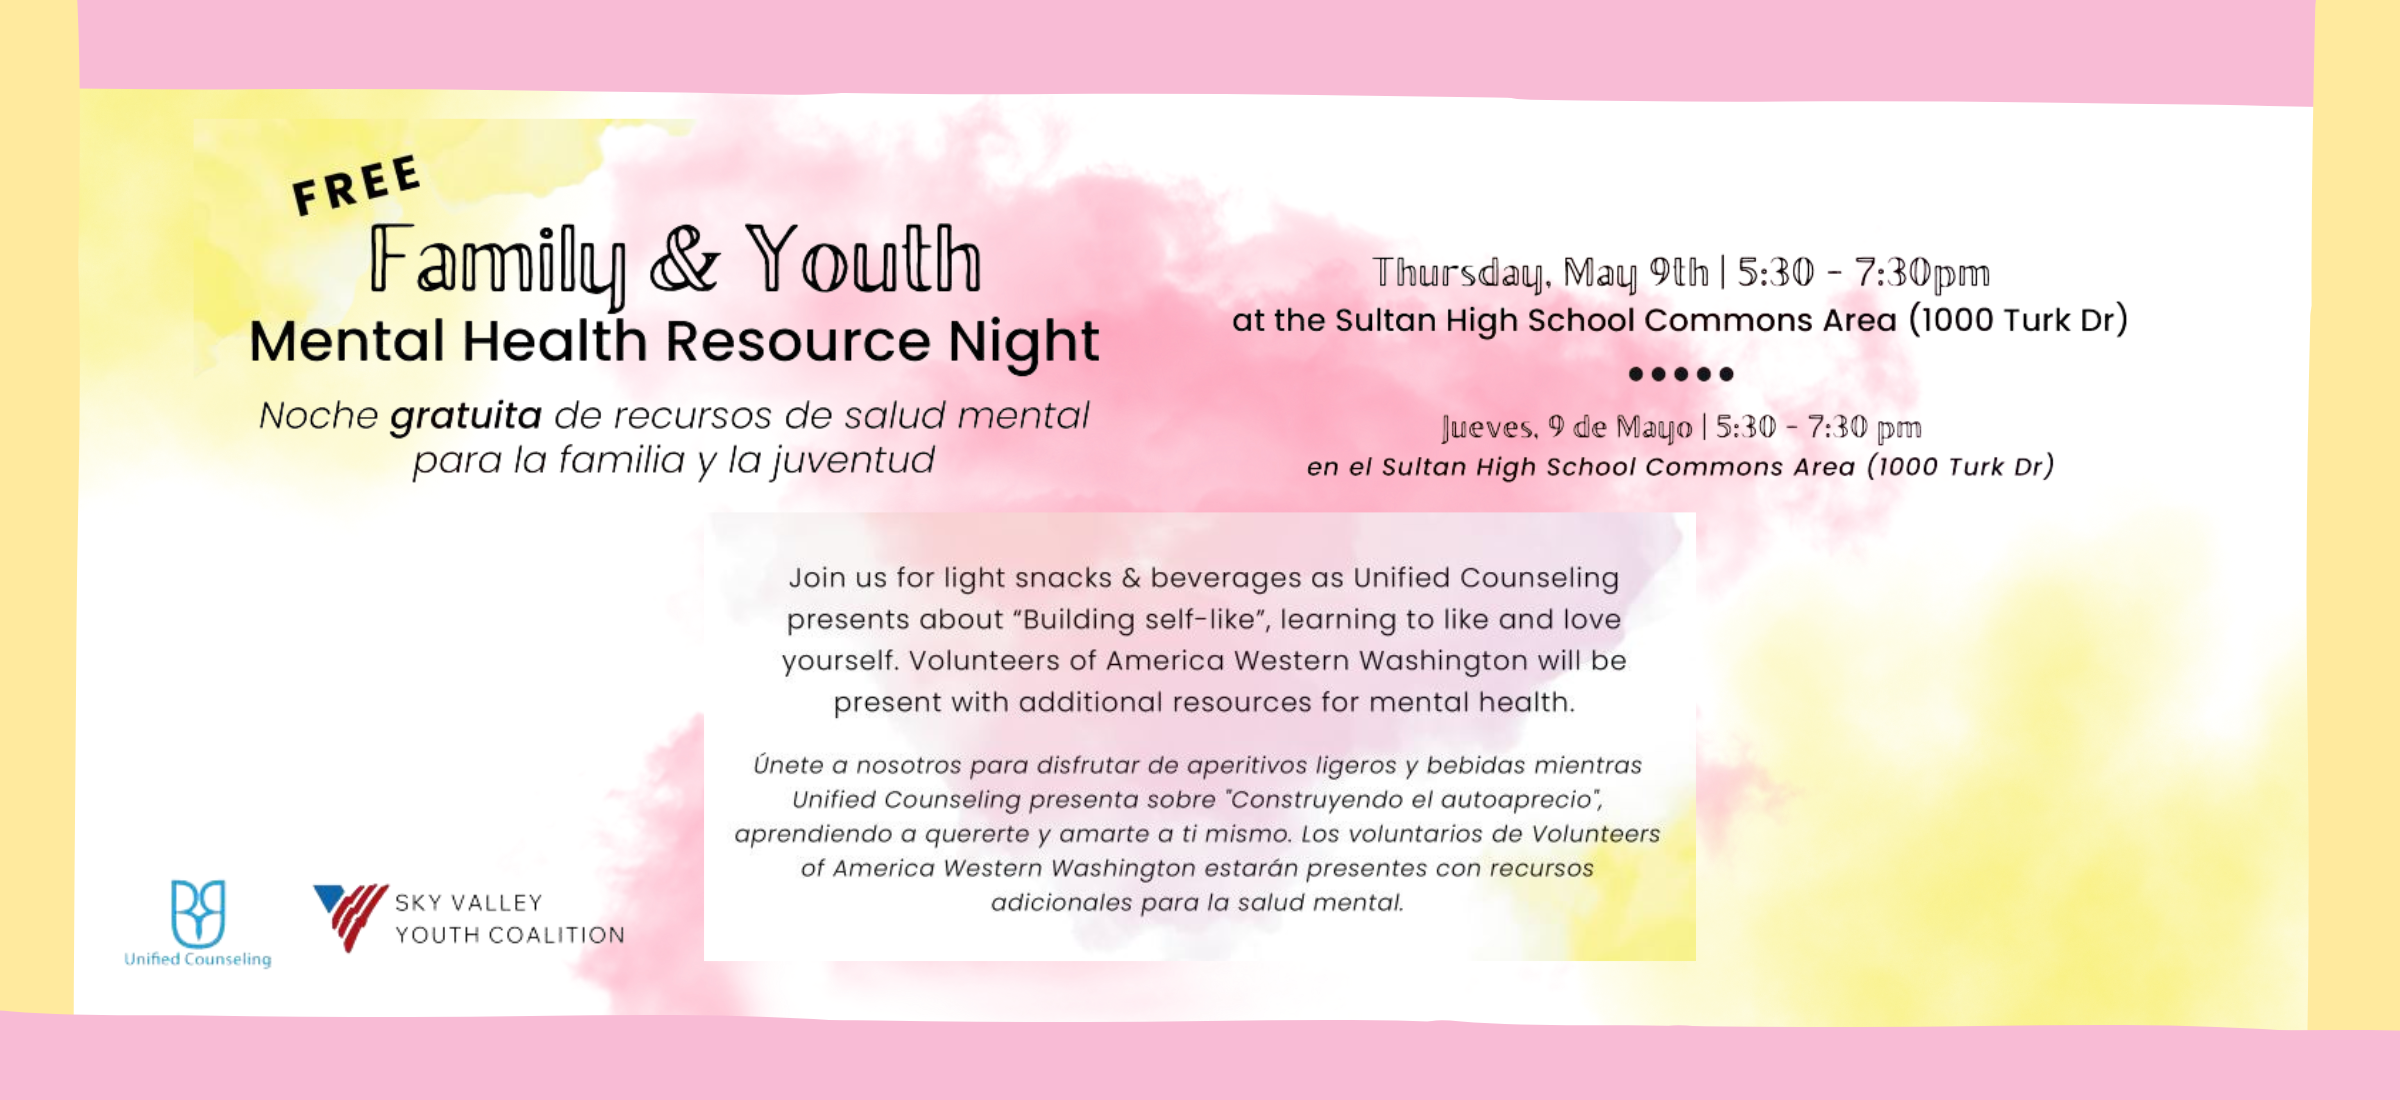 Family and Youth Mental Health Resource Night